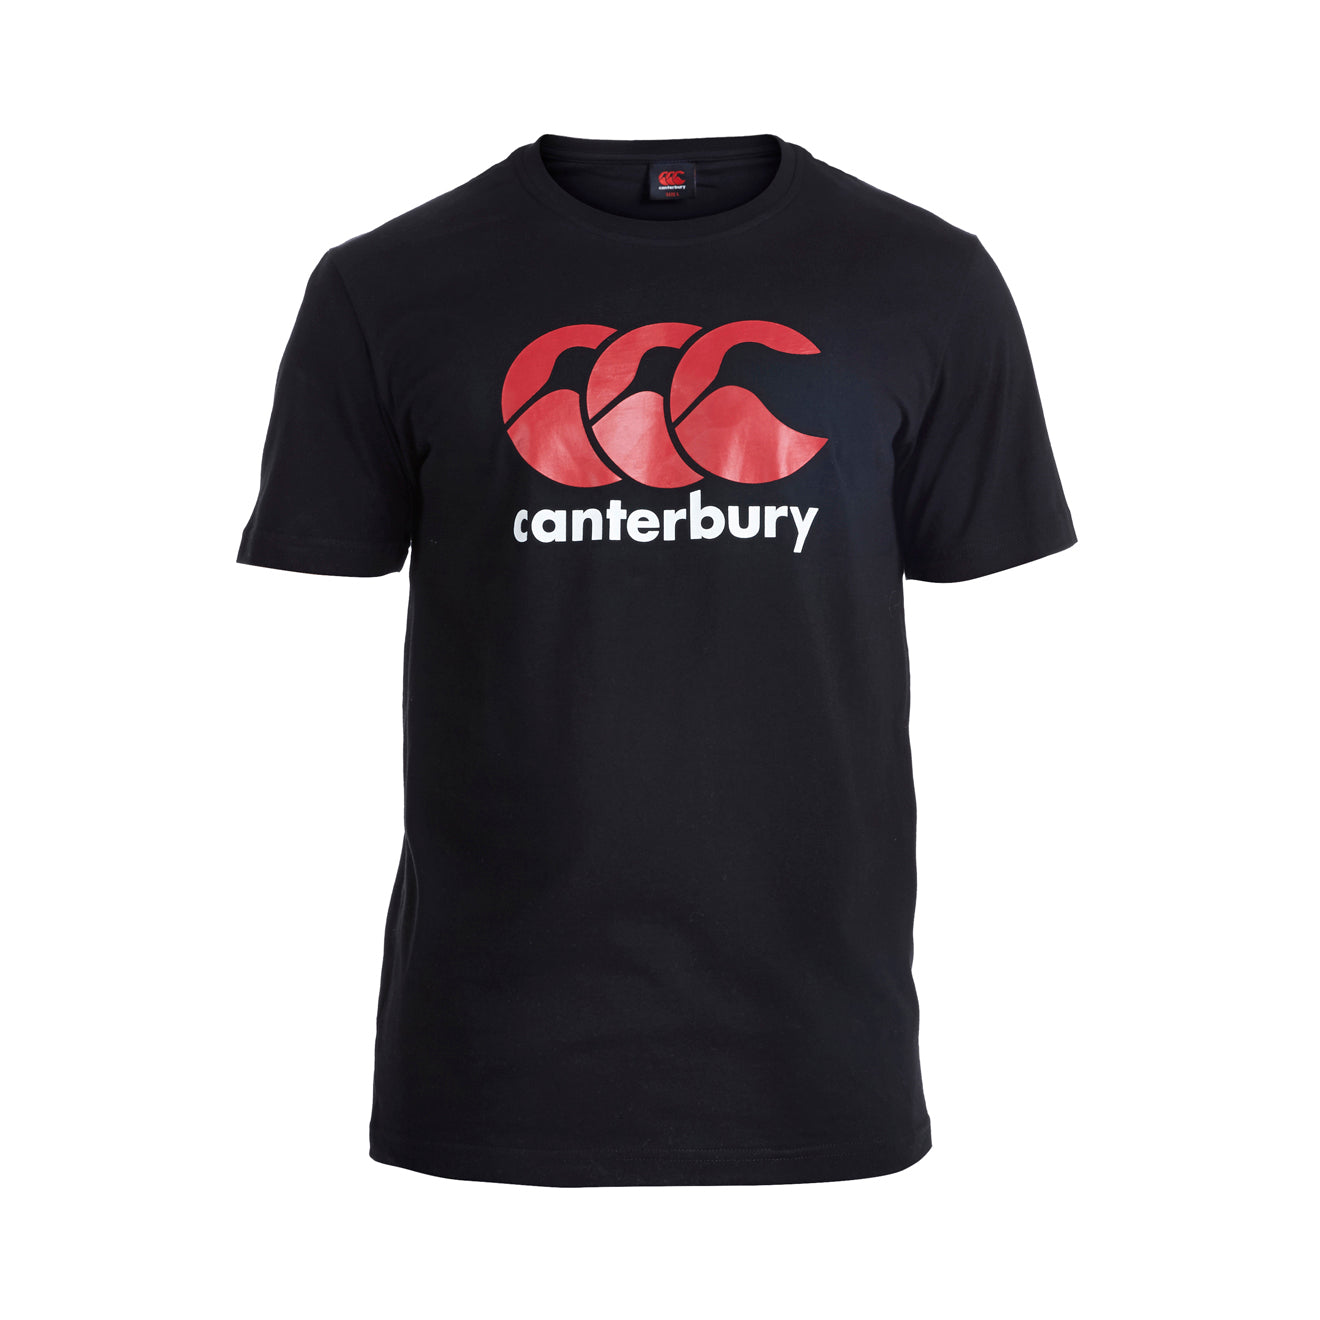 Black Canterbury tshirts with white and red logo across the chest